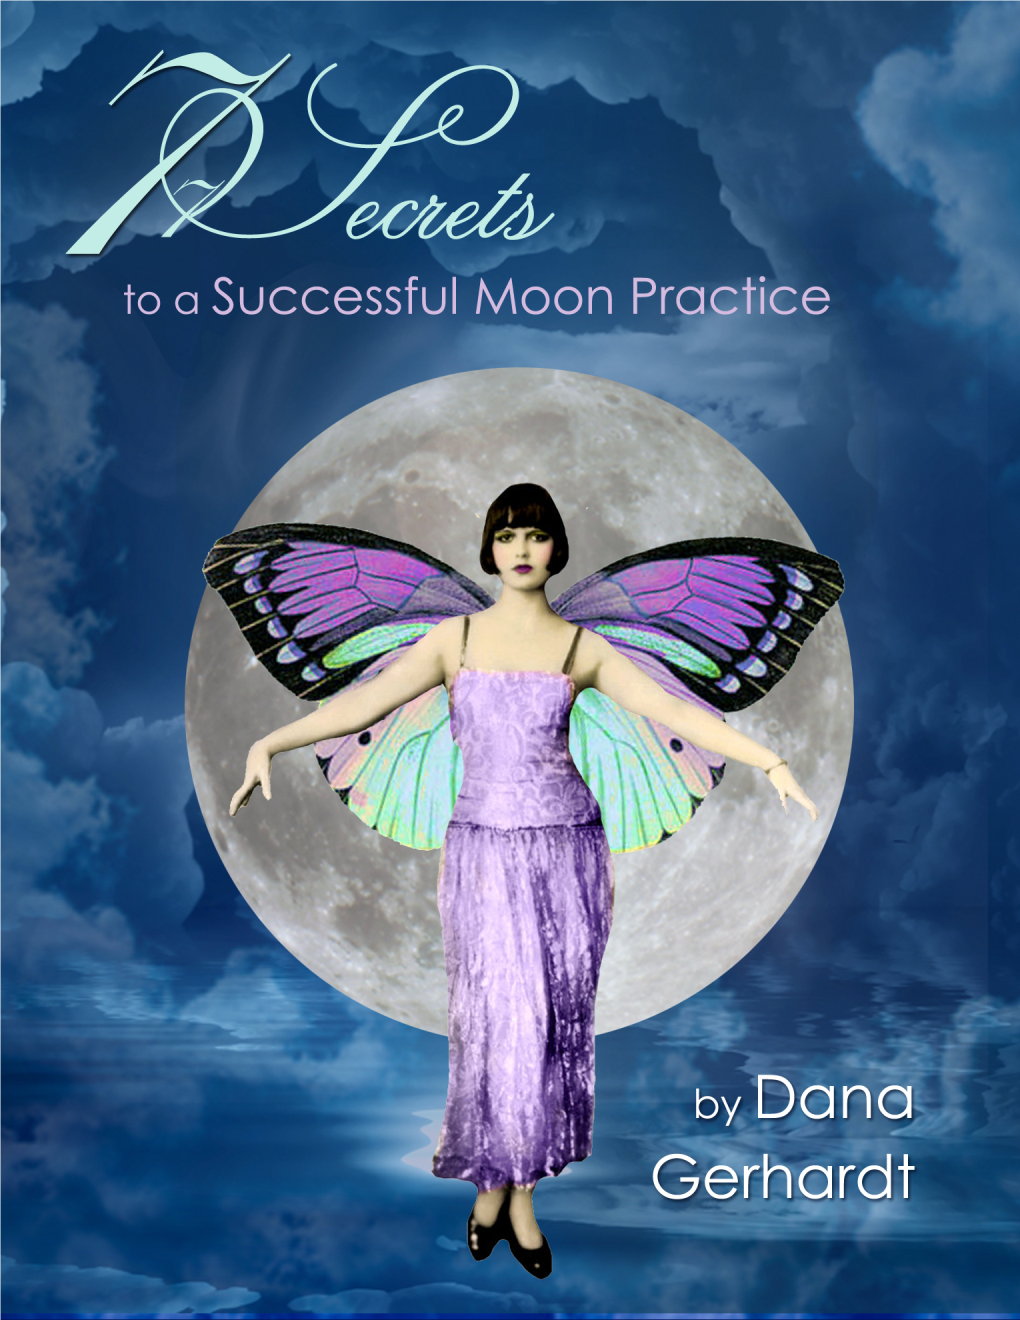 7 Secrets to a Successful Moon Practice